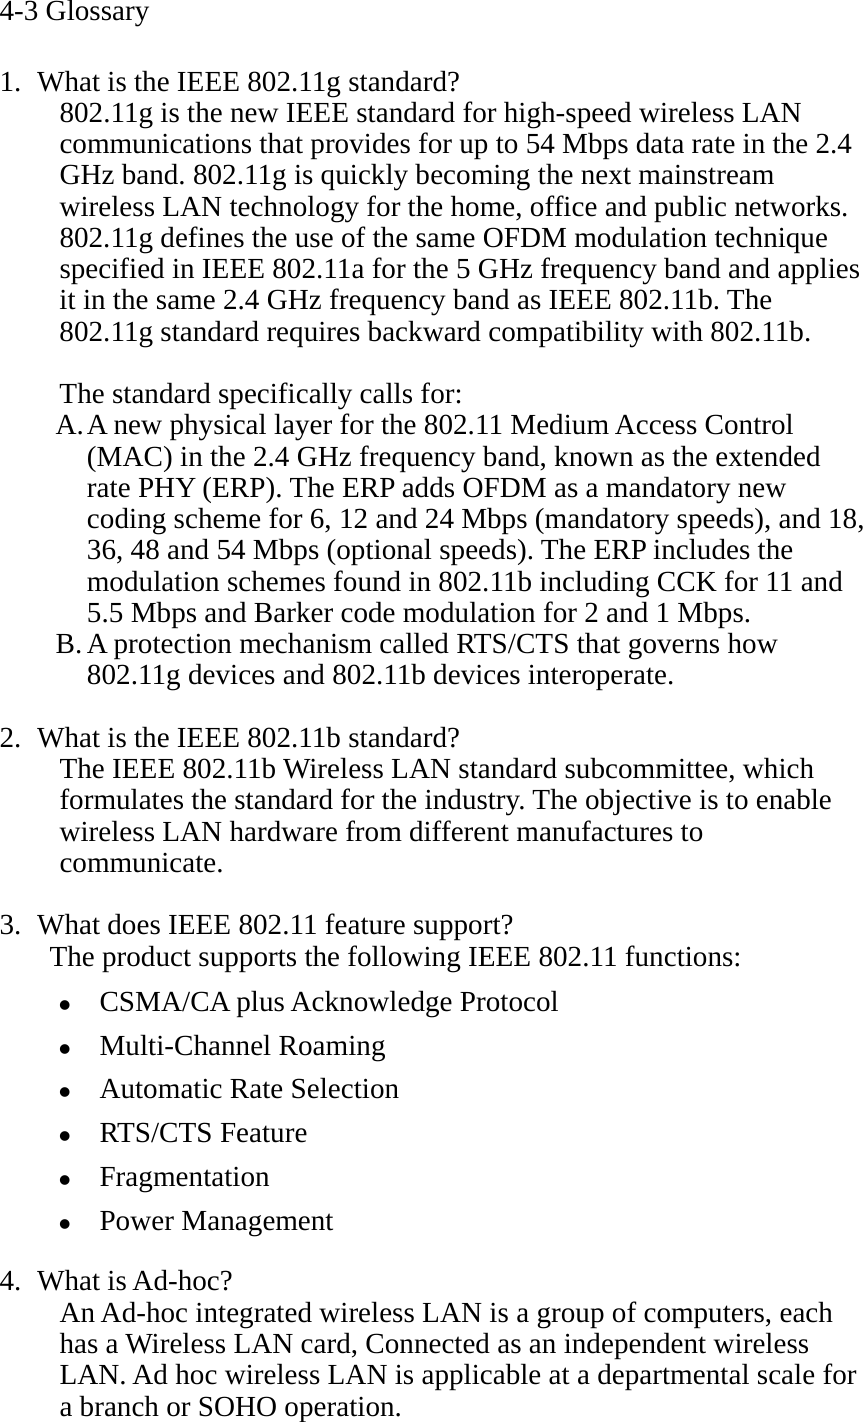 4-3 Glossary  1. What is the IEEE 802.11g standard? 802.11g is the new IEEE standard for high-speed wireless LAN communications that provides for up to 54 Mbps data rate in the 2.4 GHz band. 802.11g is quickly becoming the next mainstream wireless LAN technology for the home, office and public networks.   802.11g defines the use of the same OFDM modulation technique specified in IEEE 802.11a for the 5 GHz frequency band and applies it in the same 2.4 GHz frequency band as IEEE 802.11b. The 802.11g standard requires backward compatibility with 802.11b.  The standard specifically calls for:   A. A new physical layer for the 802.11 Medium Access Control (MAC) in the 2.4 GHz frequency band, known as the extended rate PHY (ERP). The ERP adds OFDM as a mandatory new coding scheme for 6, 12 and 24 Mbps (mandatory speeds), and 18, 36, 48 and 54 Mbps (optional speeds). The ERP includes the modulation schemes found in 802.11b including CCK for 11 and 5.5 Mbps and Barker code modulation for 2 and 1 Mbps. B. A protection mechanism called RTS/CTS that governs how 802.11g devices and 802.11b devices interoperate.  2. What is the IEEE 802.11b standard? The IEEE 802.11b Wireless LAN standard subcommittee, which formulates the standard for the industry. The objective is to enable wireless LAN hardware from different manufactures to communicate.  3. What does IEEE 802.11 feature support? The product supports the following IEEE 802.11 functions: z CSMA/CA plus Acknowledge Protocol z Multi-Channel Roaming z Automatic Rate Selection z RTS/CTS Feature z Fragmentation z Power Management  4. What is Ad-hoc? An Ad-hoc integrated wireless LAN is a group of computers, each has a Wireless LAN card, Connected as an independent wireless LAN. Ad hoc wireless LAN is applicable at a departmental scale for a branch or SOHO operation. 